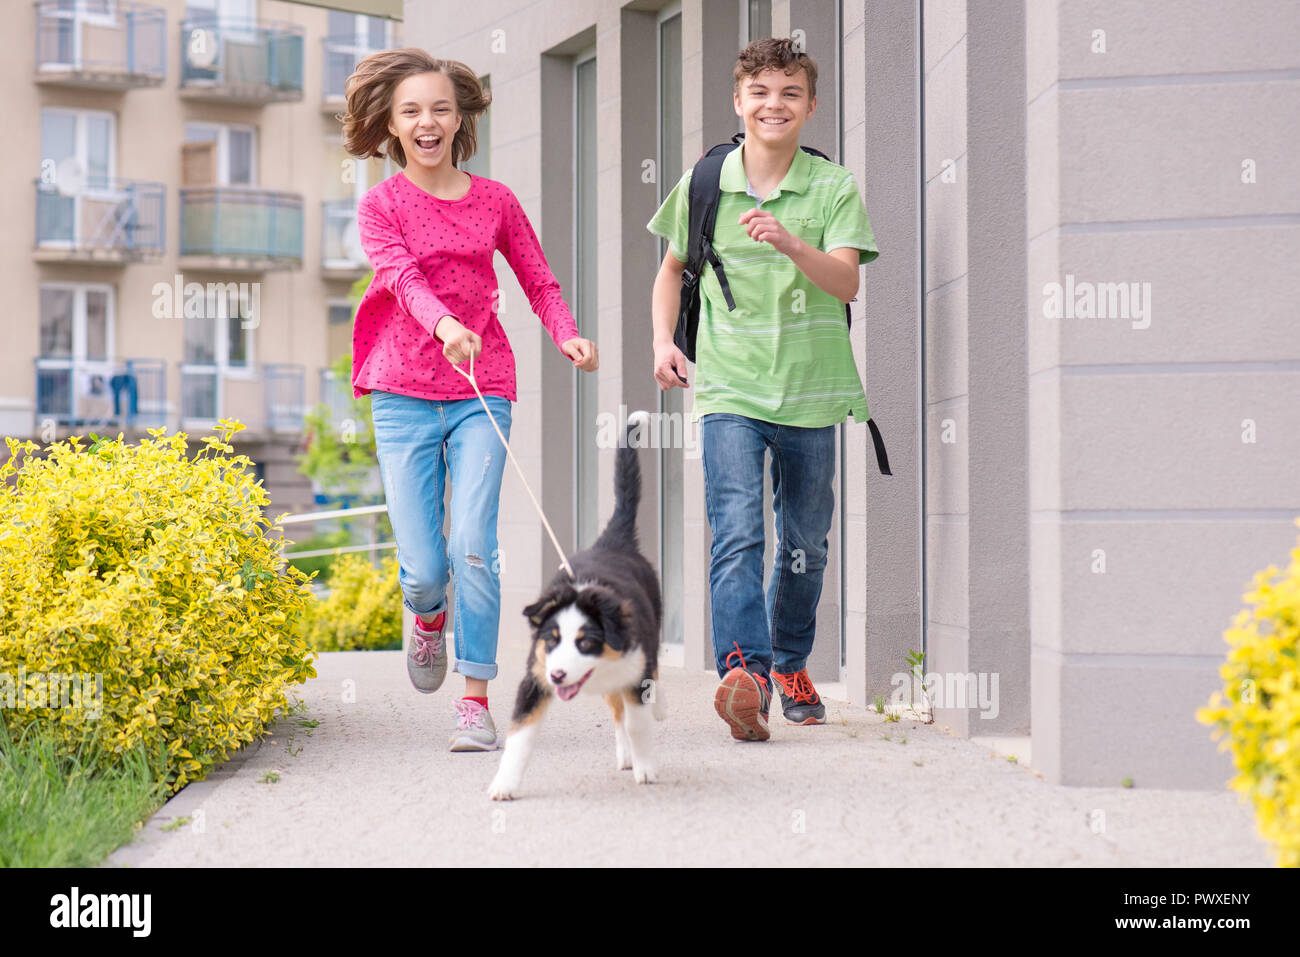 Cute children - happy teen boy and girl playing with puppy Australian Shepherd dog, outdoors. Friendship and care concept. Stock Photo